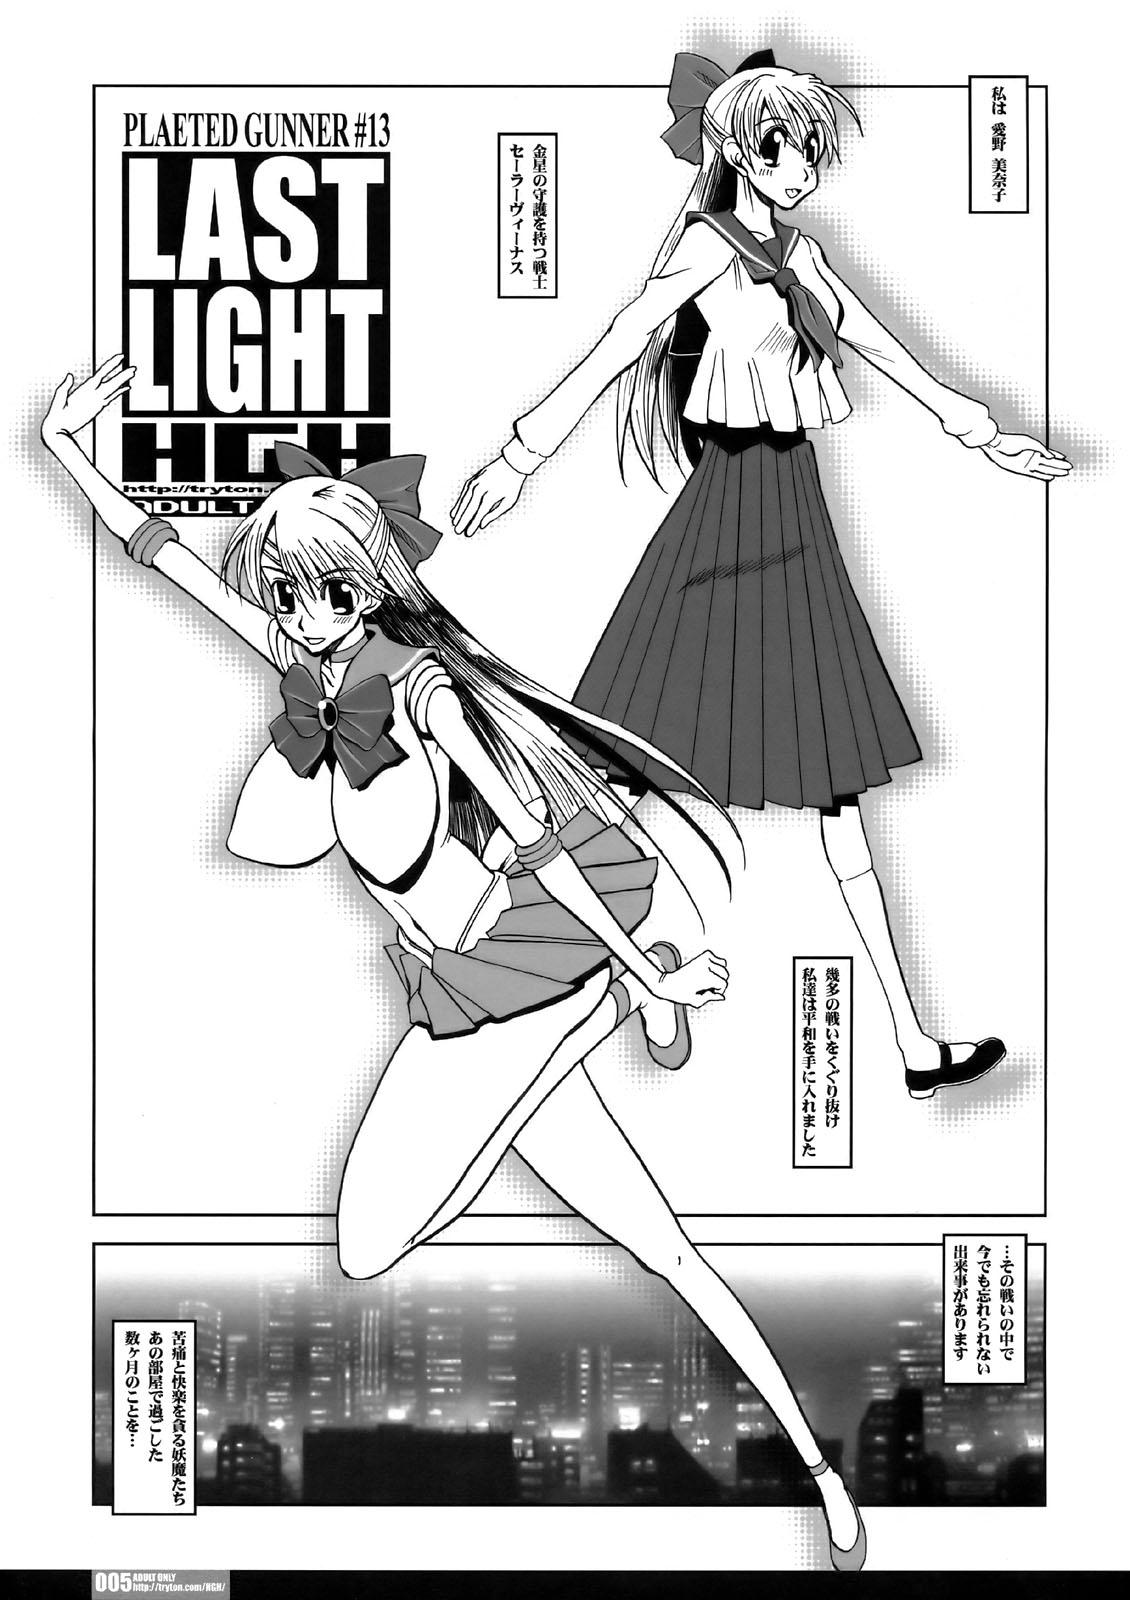 Glamcore HGH - Last Light - Sailor moon Real Amateur - Page 5